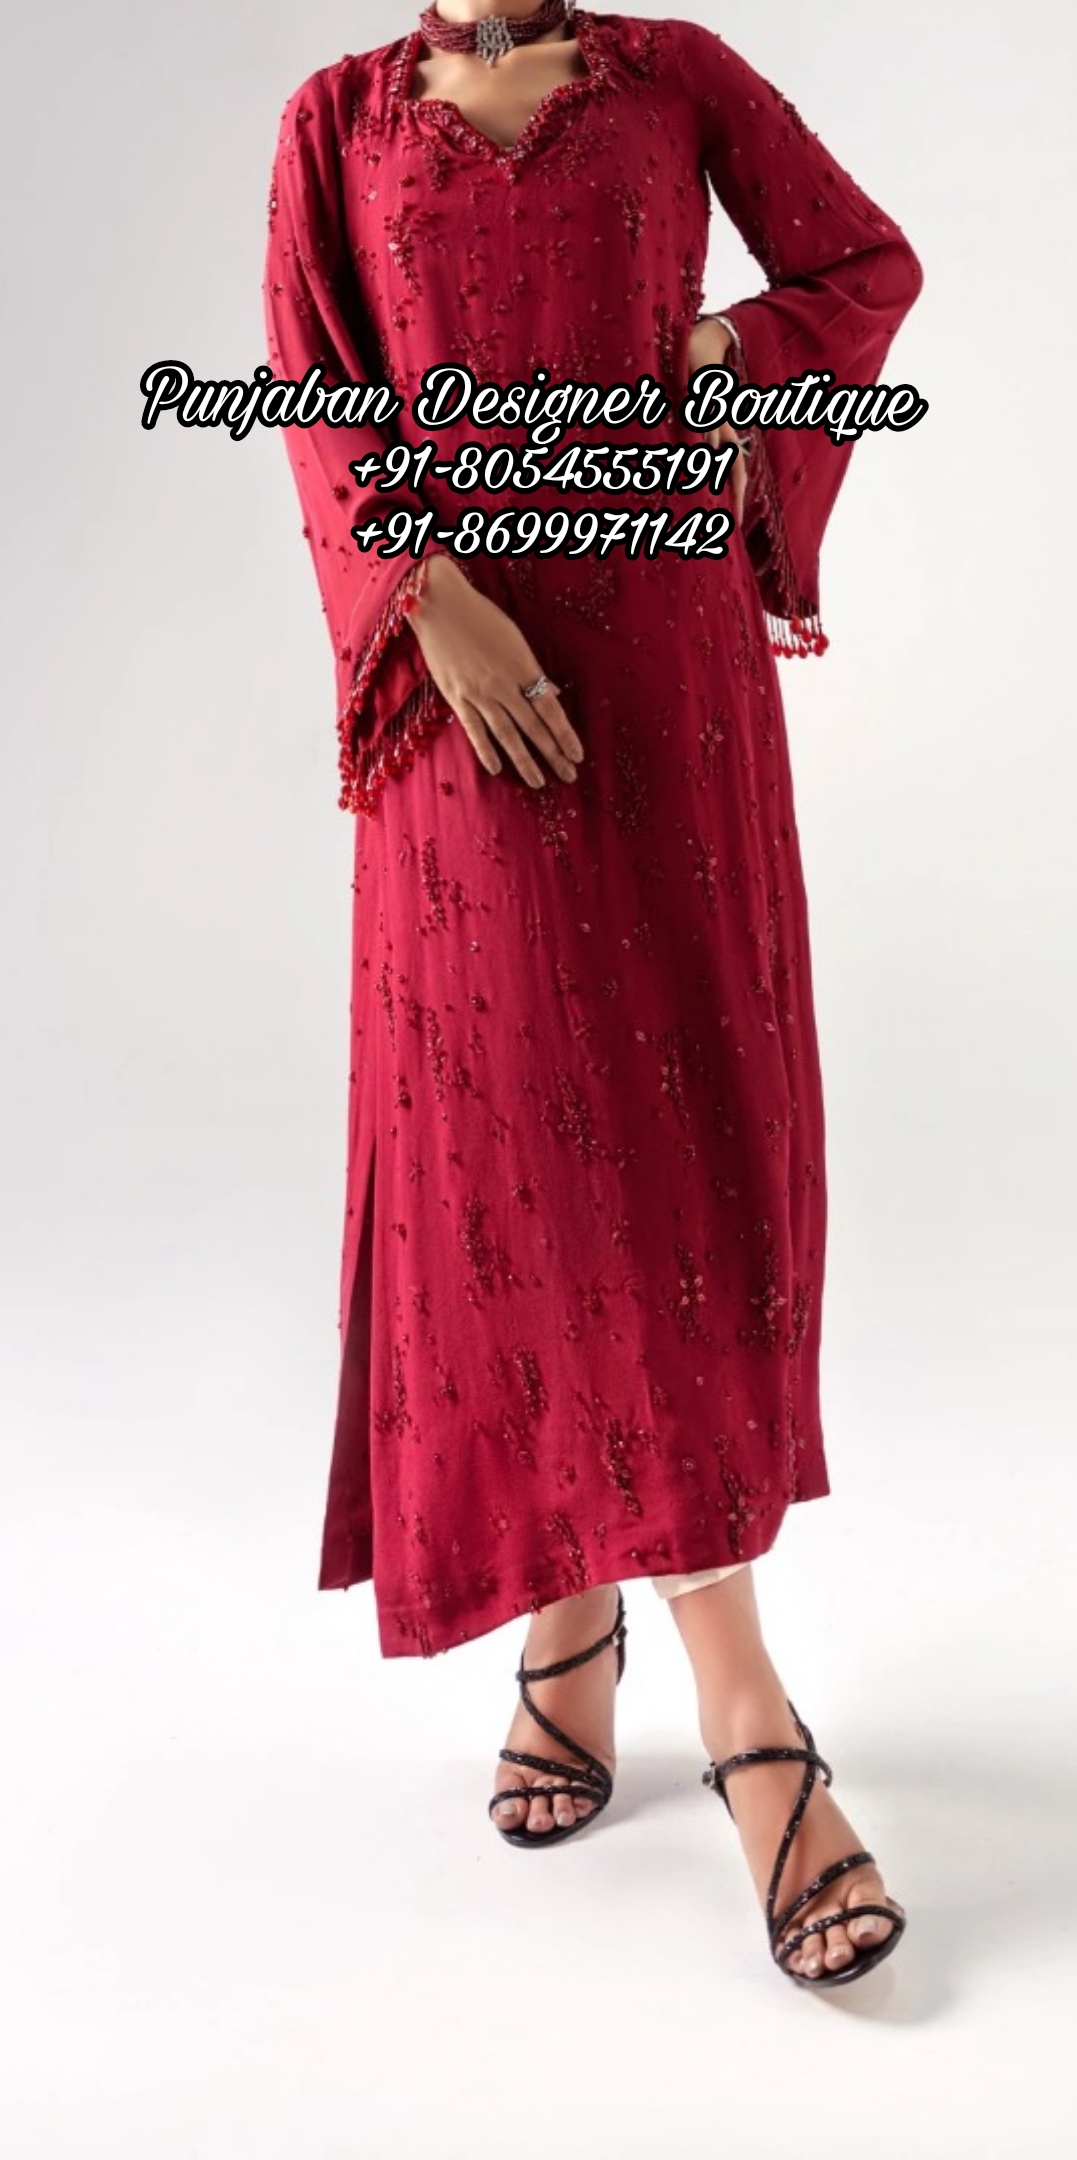 Stitched Embroidered Punjabi Suit Lace Design/neck Designs For Ladies Suit  at best price in Surat